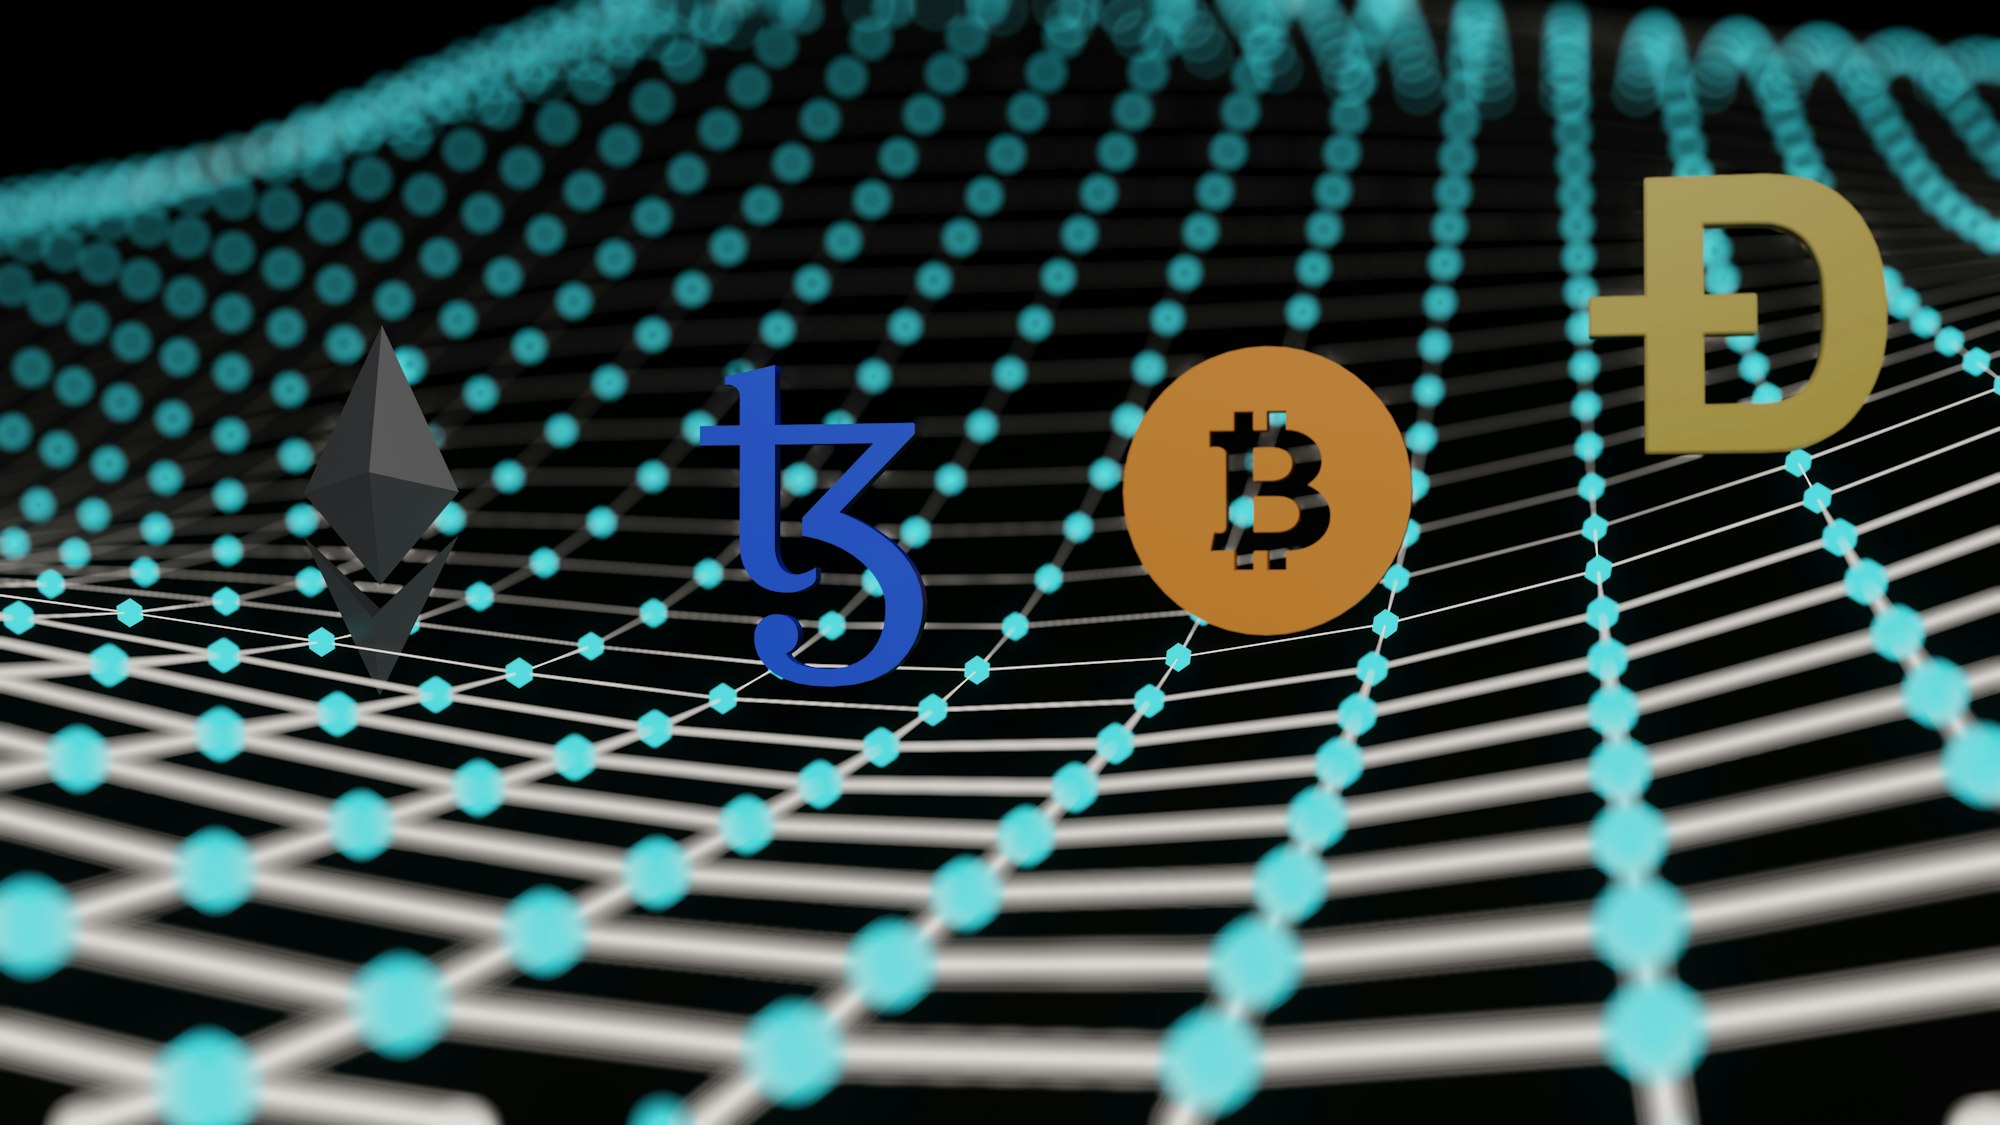 3D illustration of Tezos coin, bitcoin, Ehtereum, and dogecoin floating on a wave.
Tezos is a blockchain designed to evolve.
work 👇: 
 Email: shubhamdhage000@gmail.com